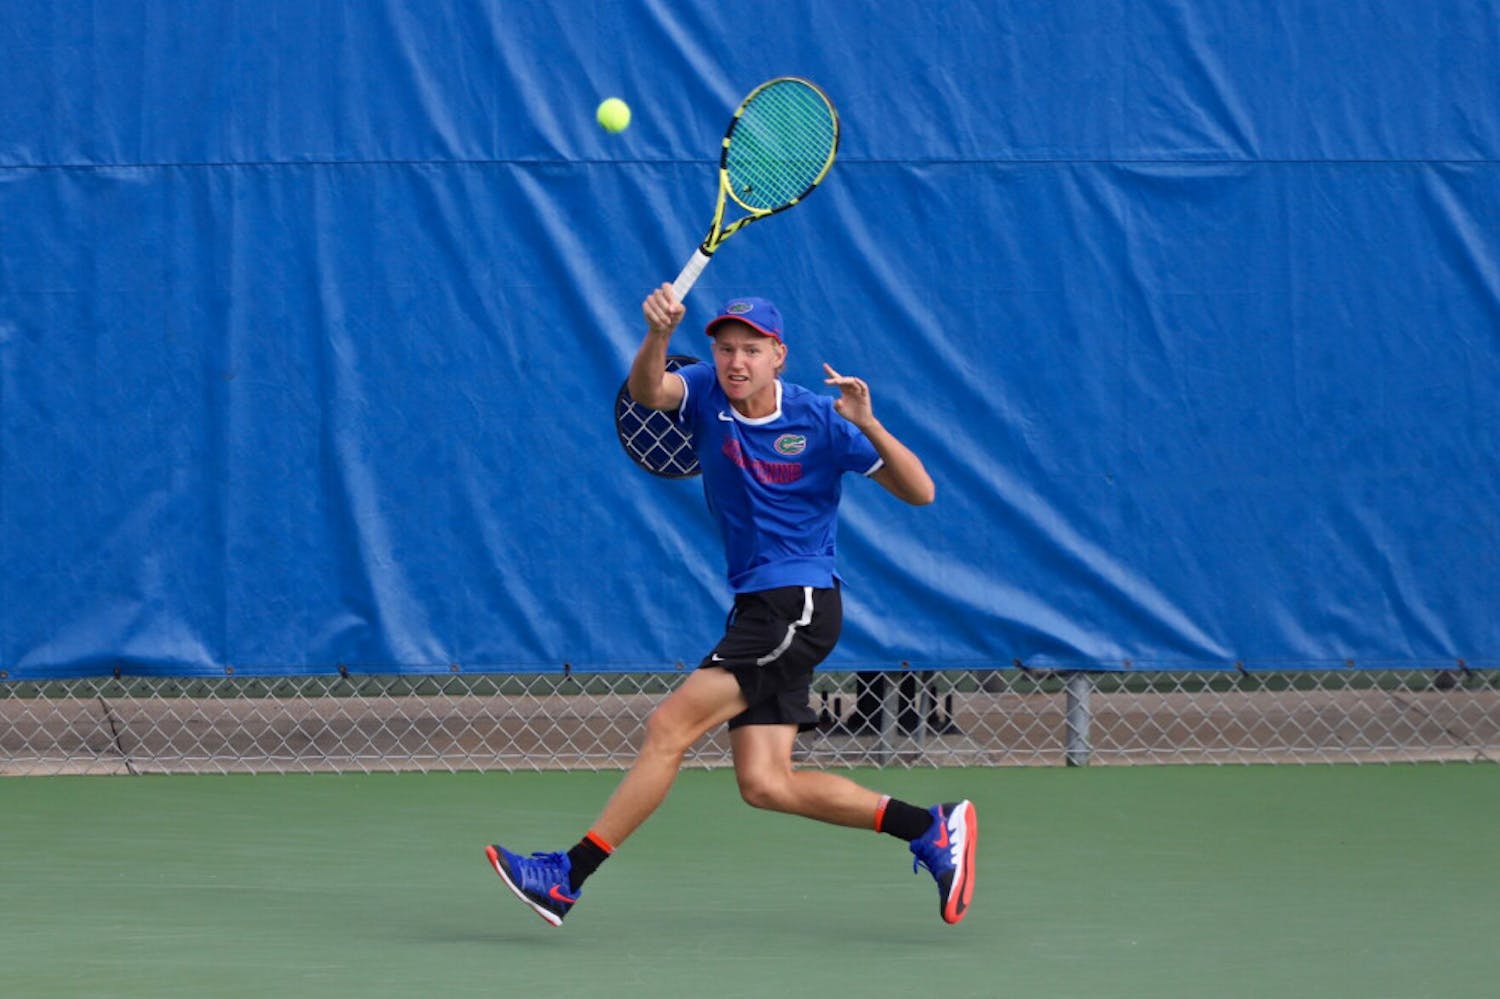 Lukas Greif, who is now a senior, swings at a tennis ball on the fourth day of the 2019 ITA Tournament in Gainesville. 